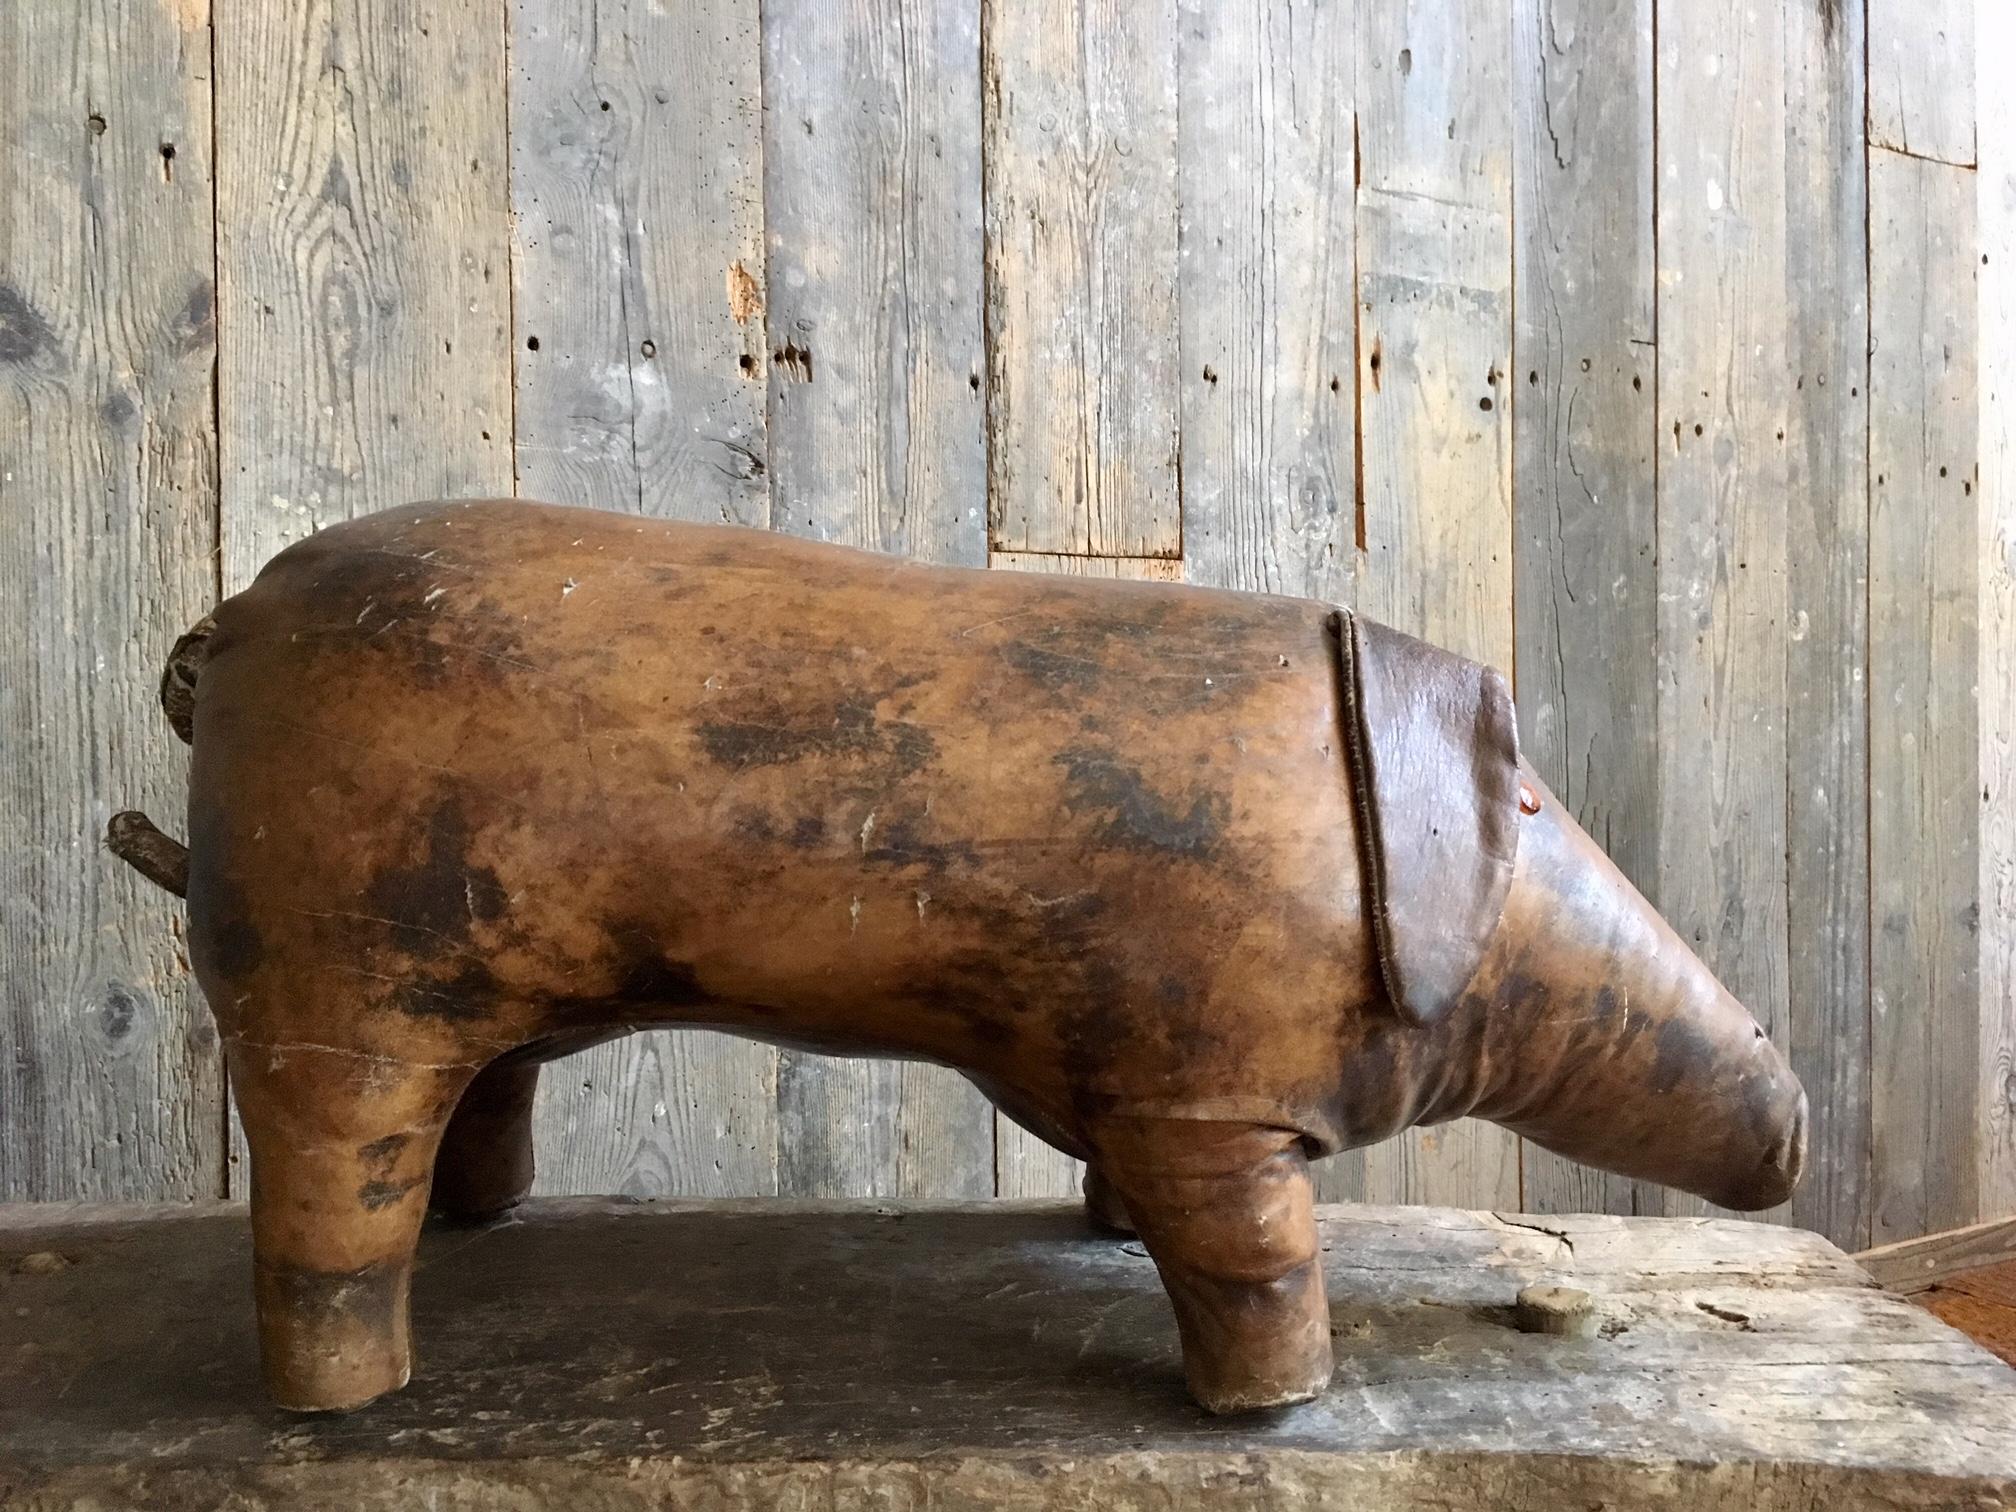 Abercrombie & Fitch vintage leather footstool in the shape of a pig. This footstool is made in the 1960s and the design is by Dimitri Omersa. A special collector's item. The leather shows traces of aging, such as discoloration and small cracks, but